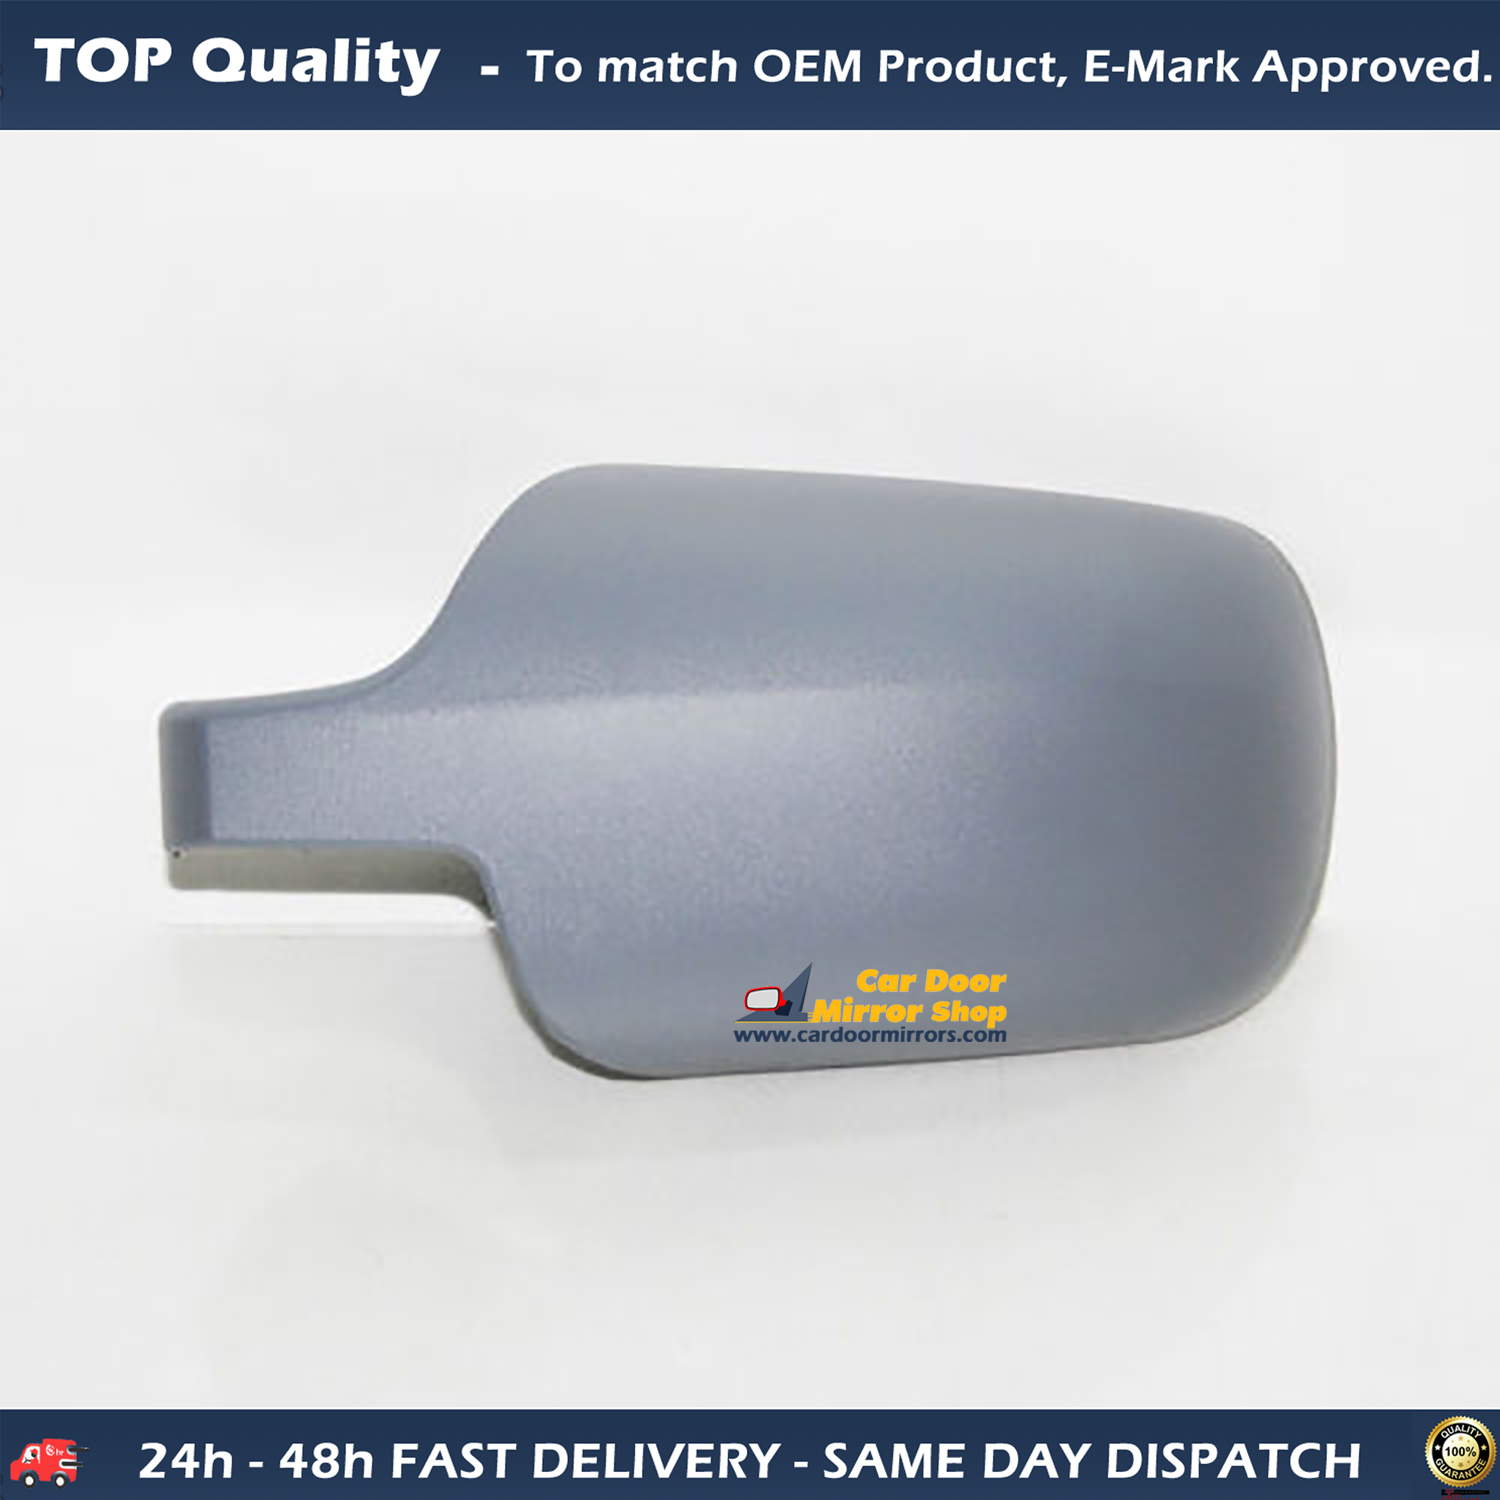 Ford Fusion Wing Mirror Cover LEFT HAND ( UK Passenger Side ) 2002 to 2006 – Wing Mirror Cover ( Primed )